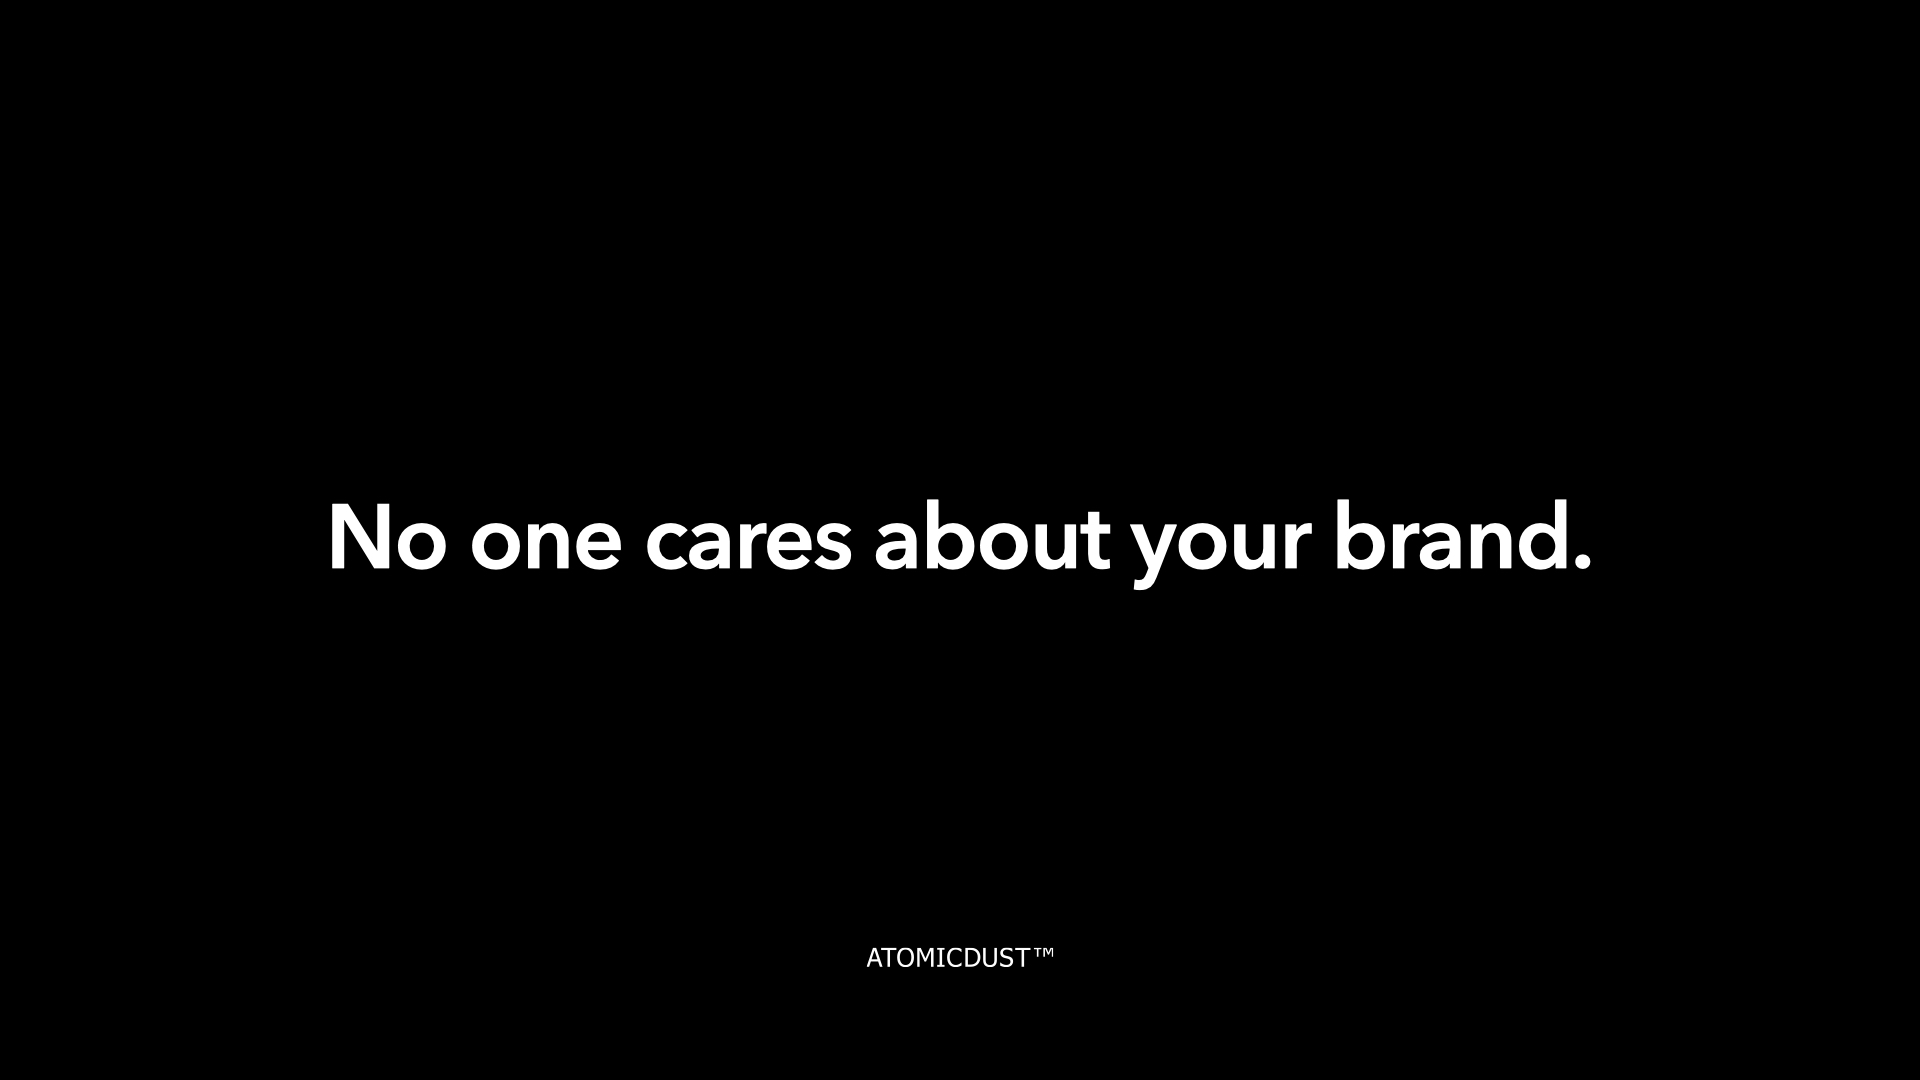 A black rectangle with white type that says "No one cares about your brand."